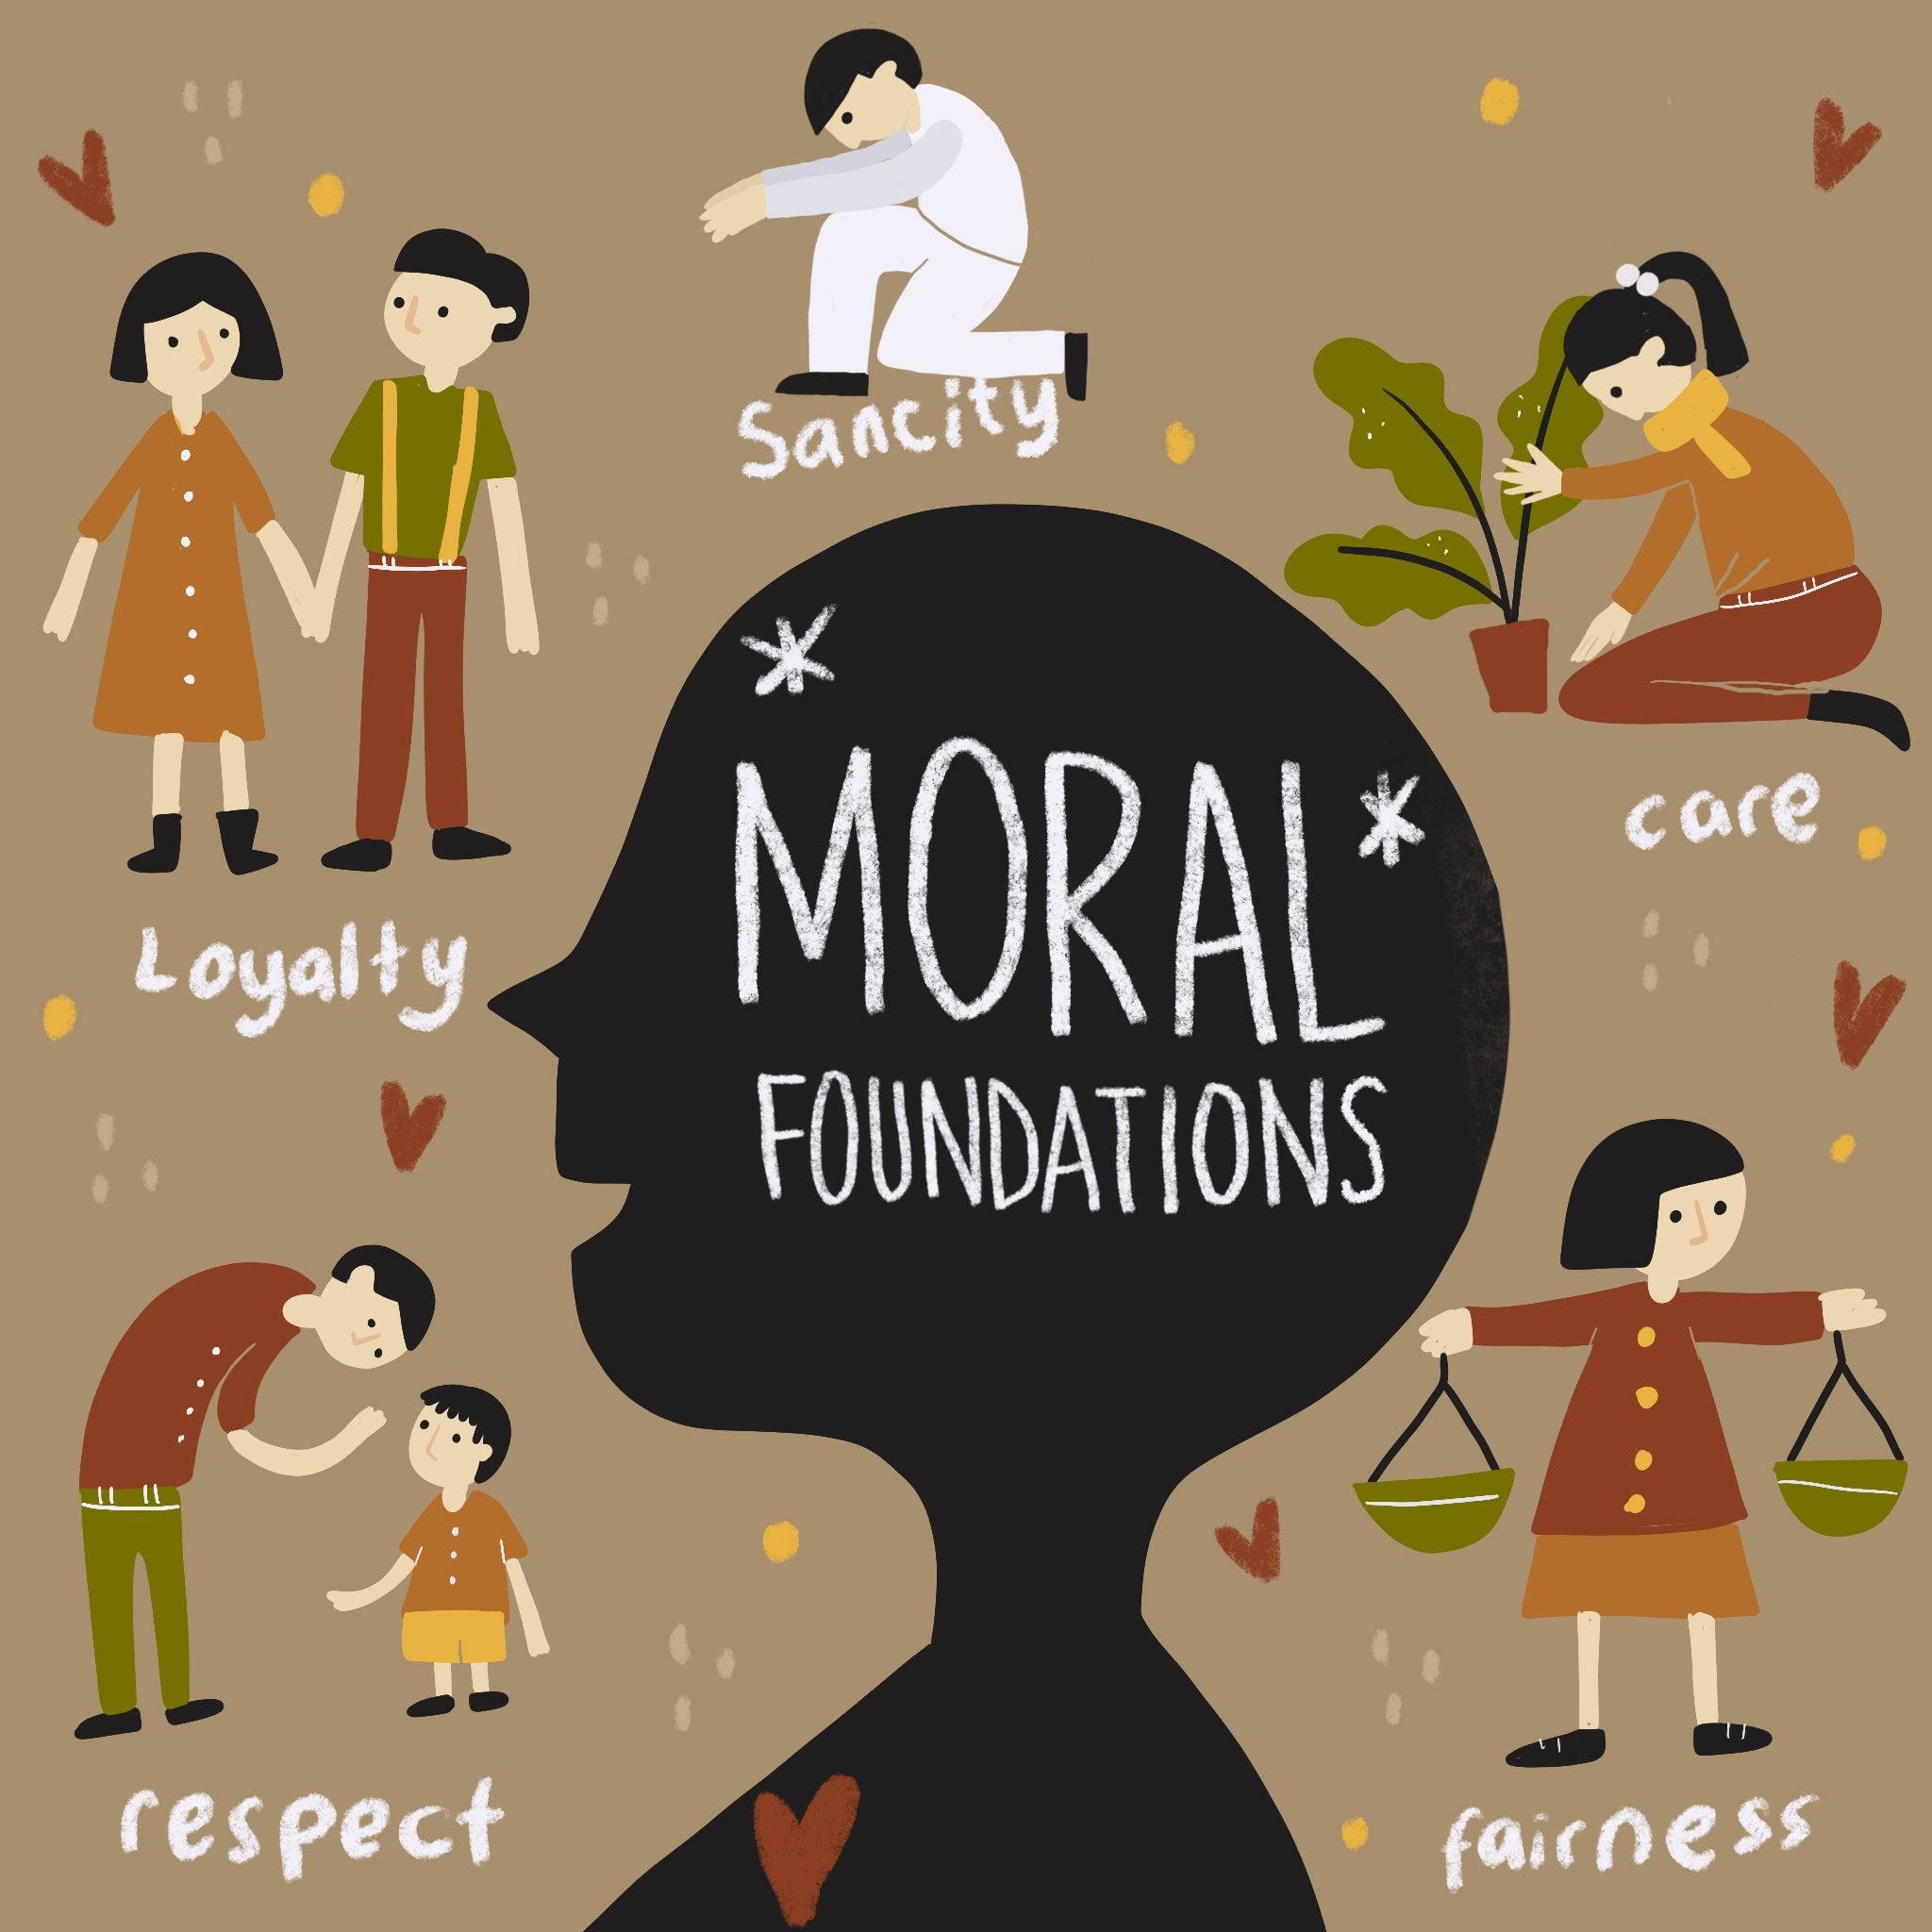 Exercising Moral Foundations Theory